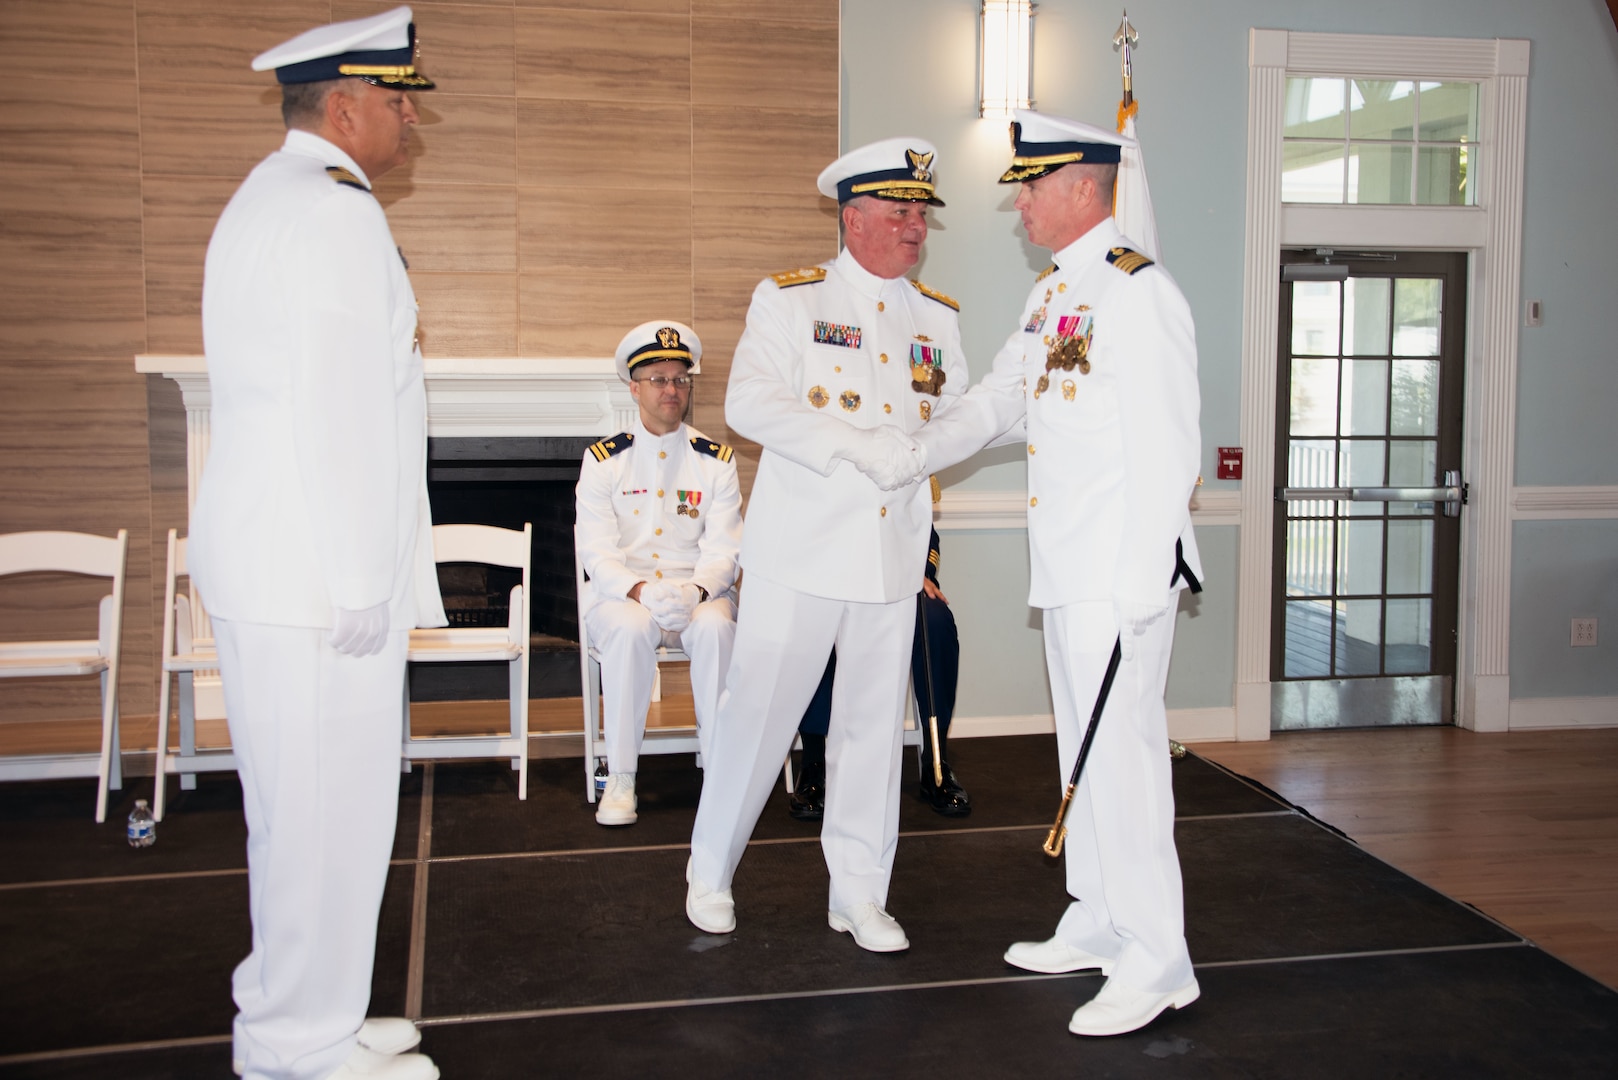 Capt. Francis J. DelRosso, Coast Guard Sector Jacksonville commander, Rear Adm. Brendan C. McPherson, Coast Guard Seventh District Commander, and Capt. John D. Cole, former Sector Charleston commander, conducts a change-of-command ceremony at The Citadel Beach Club, Charleston, South Carolina, April 14, 2023. Capt. DelRosso relieves Capt. Cole of command. (U.S. Coast Guard photo by Petty Officer 1st Class David Micallef)